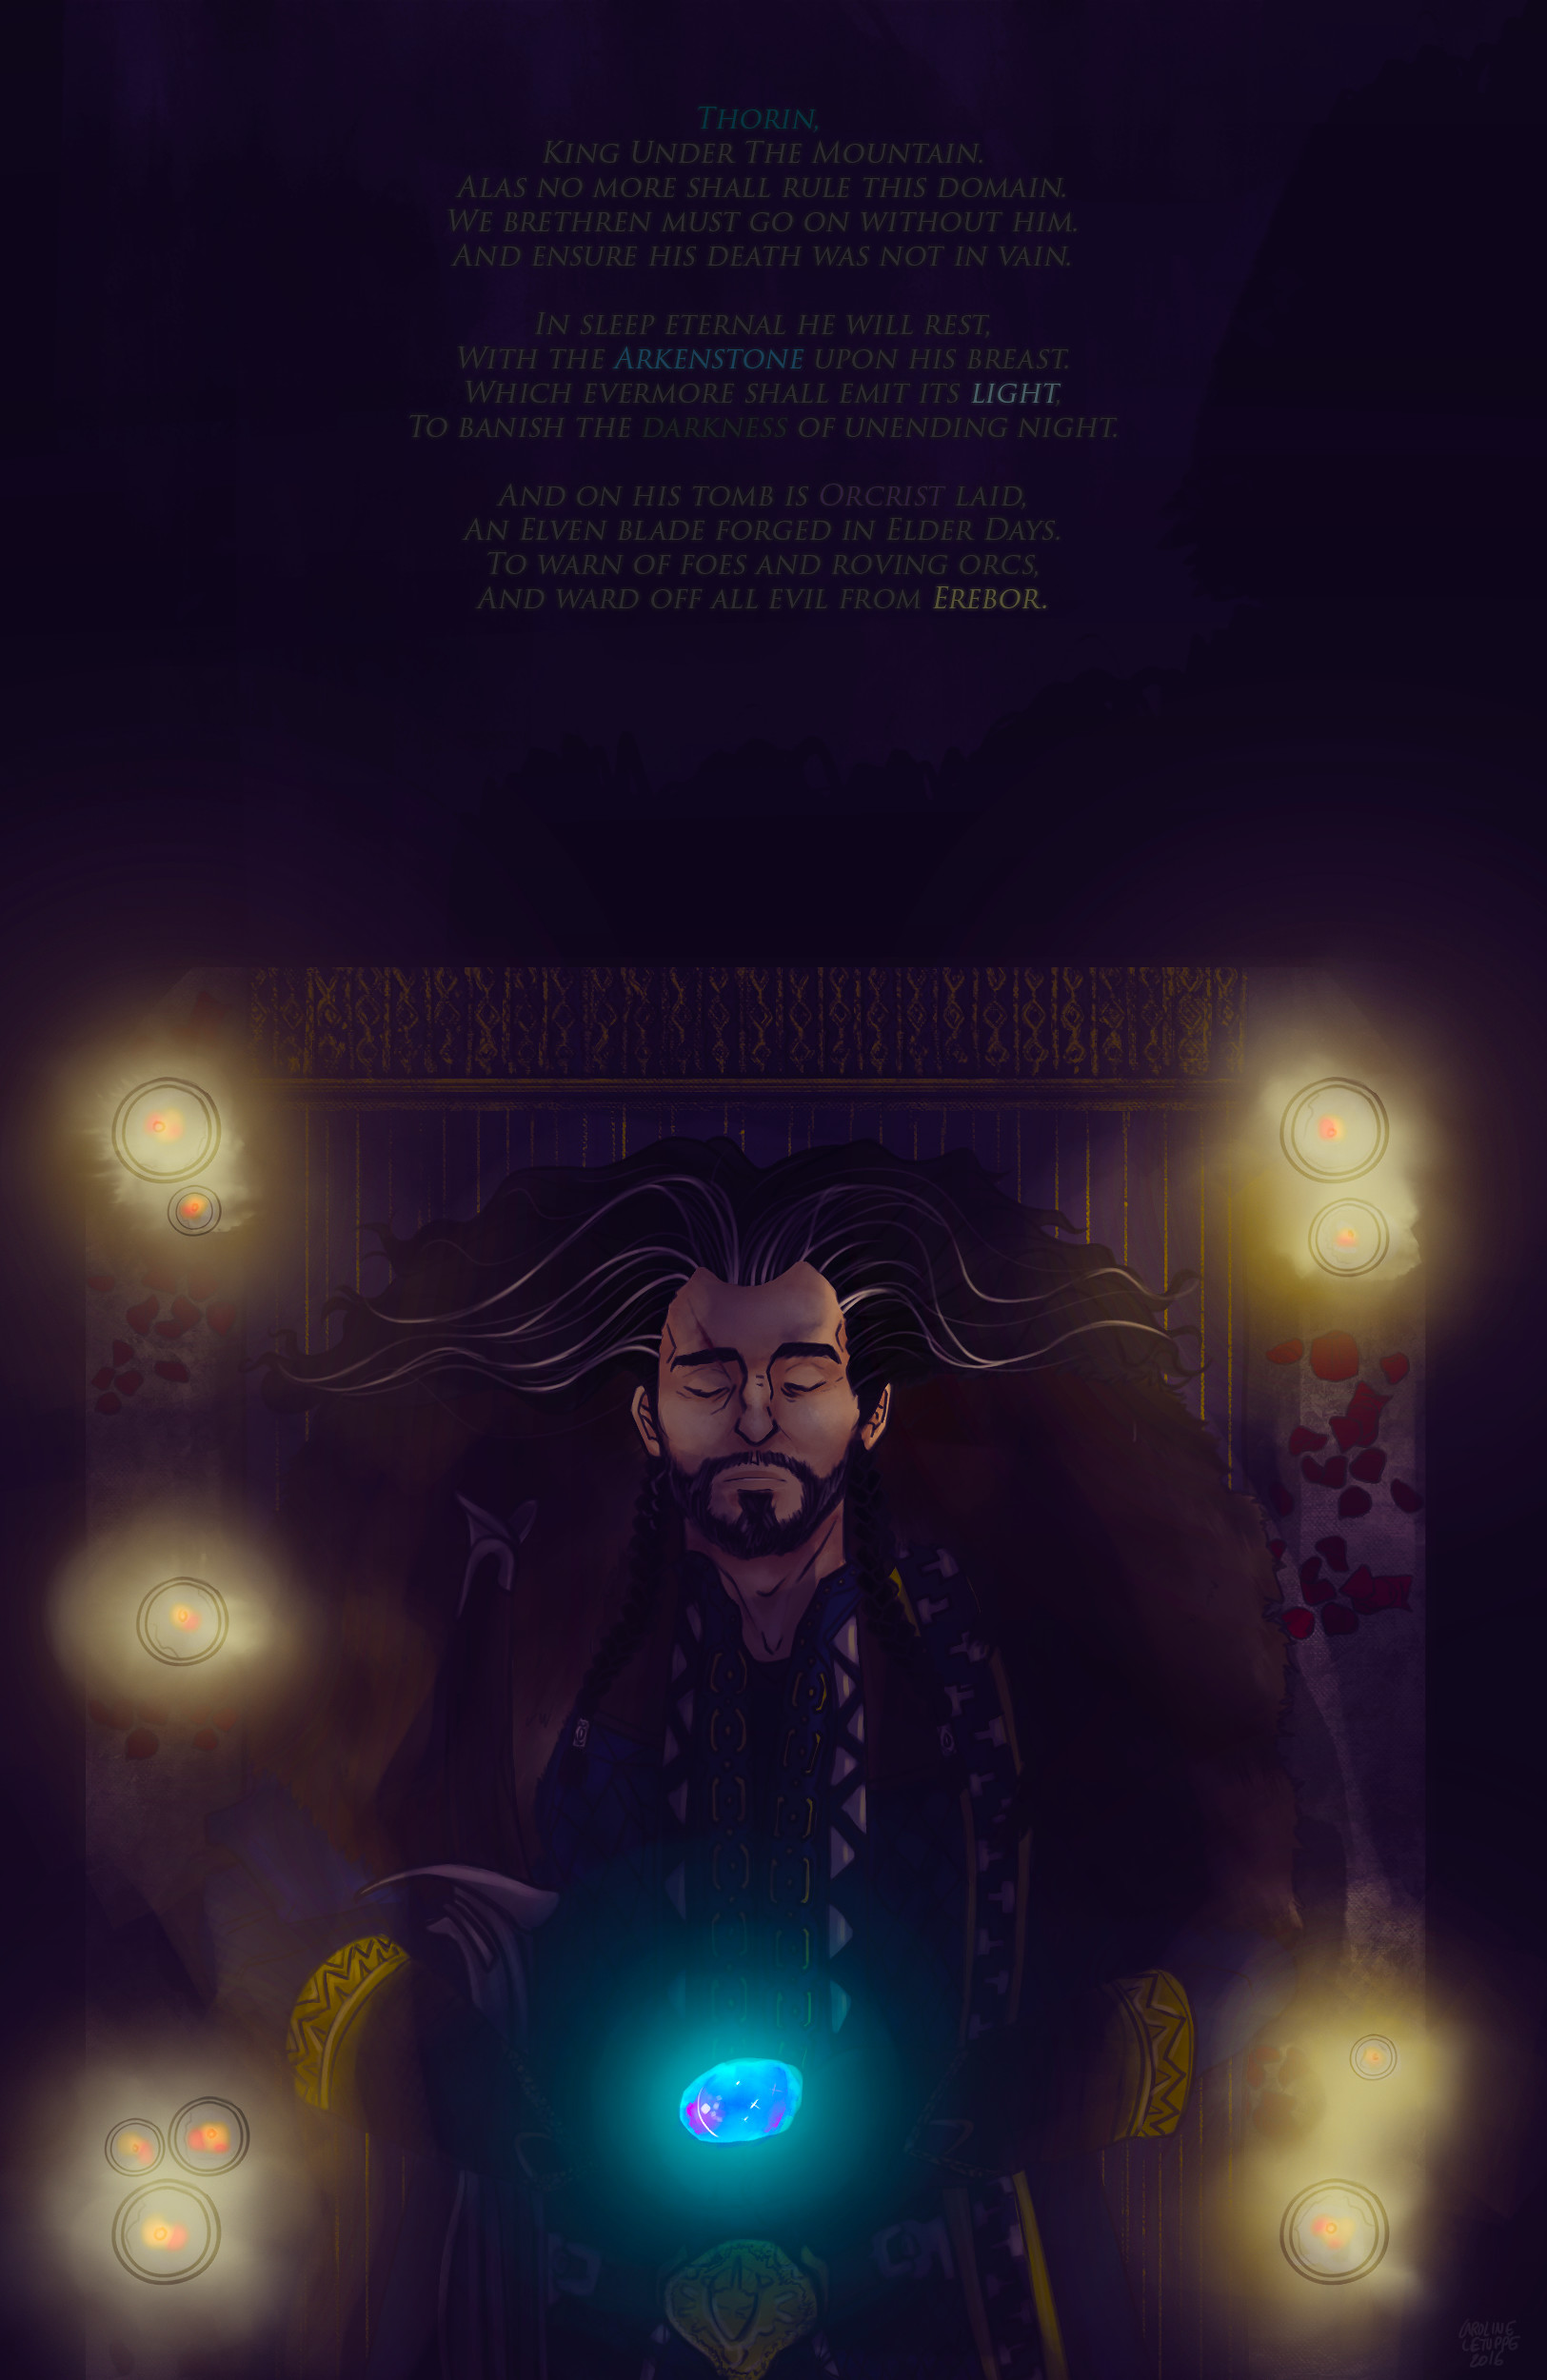 1625x2500 ... thorin's funeral wallpaper - the king of erebor. by Pendraagon